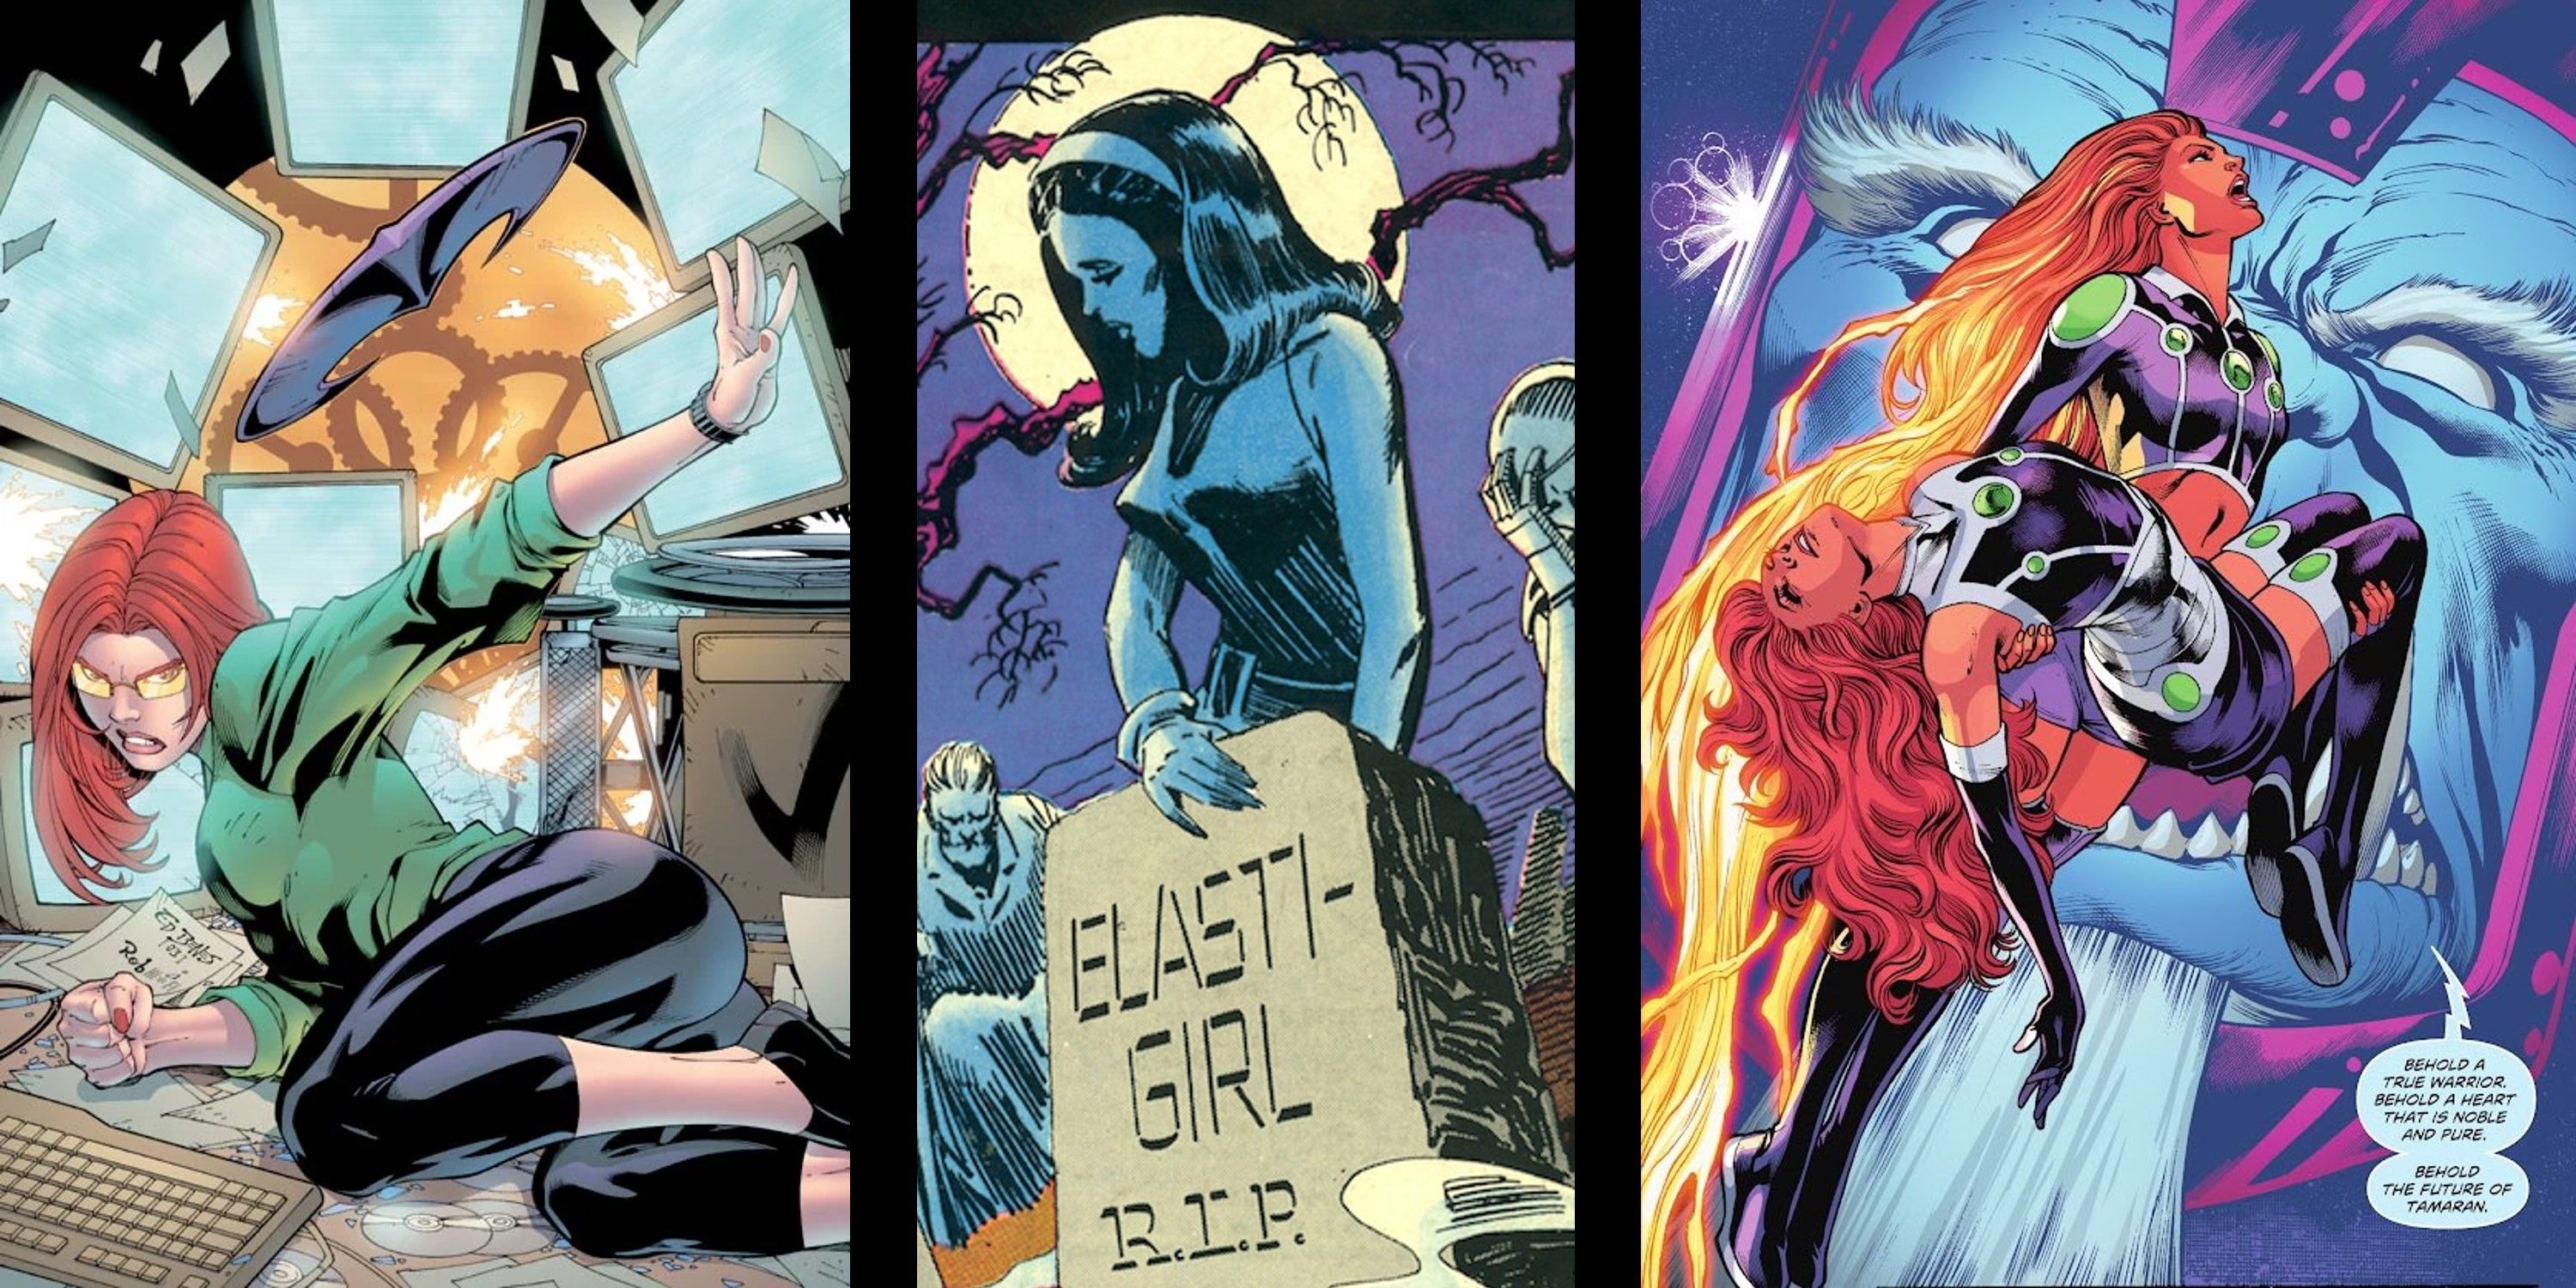 From left to right, Barbara Gordon as Oracle, Elasti-Girl stands over her headstone, Koriand'r is the future of Tamaran